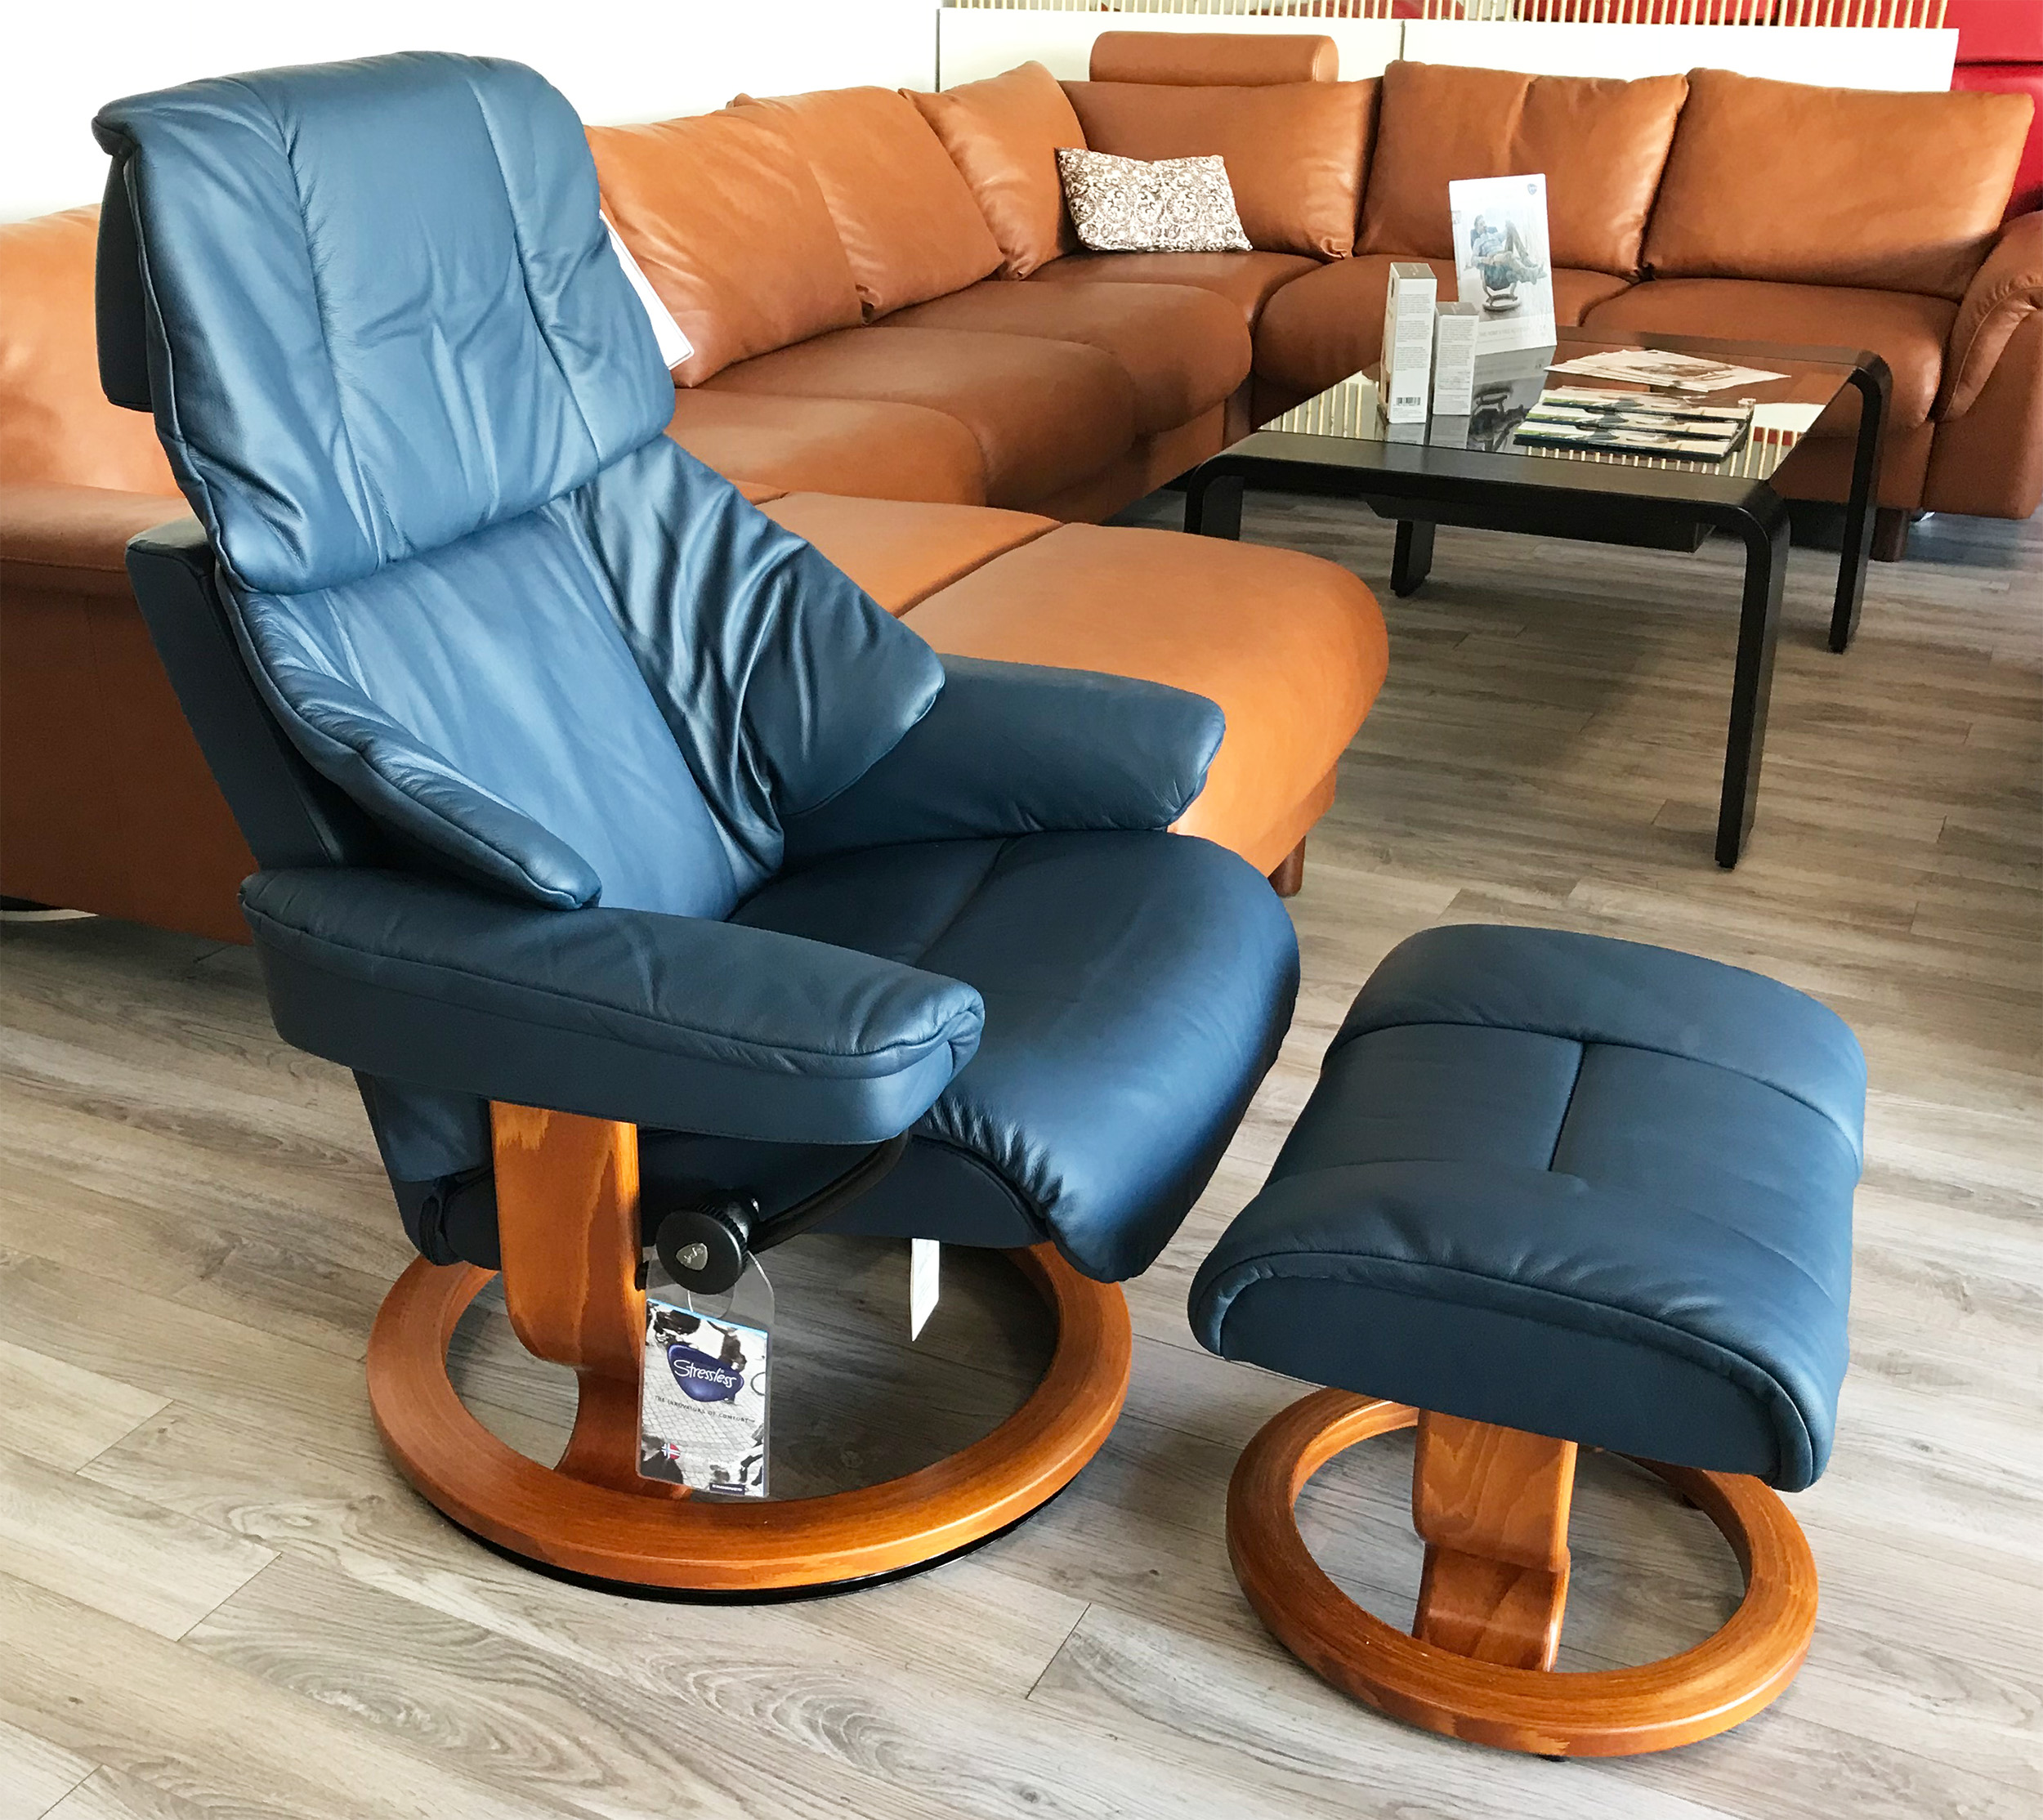 Stressless Reno Paloma Oxford Blue Leather Recliner Chair and Ottoman by Ekornes